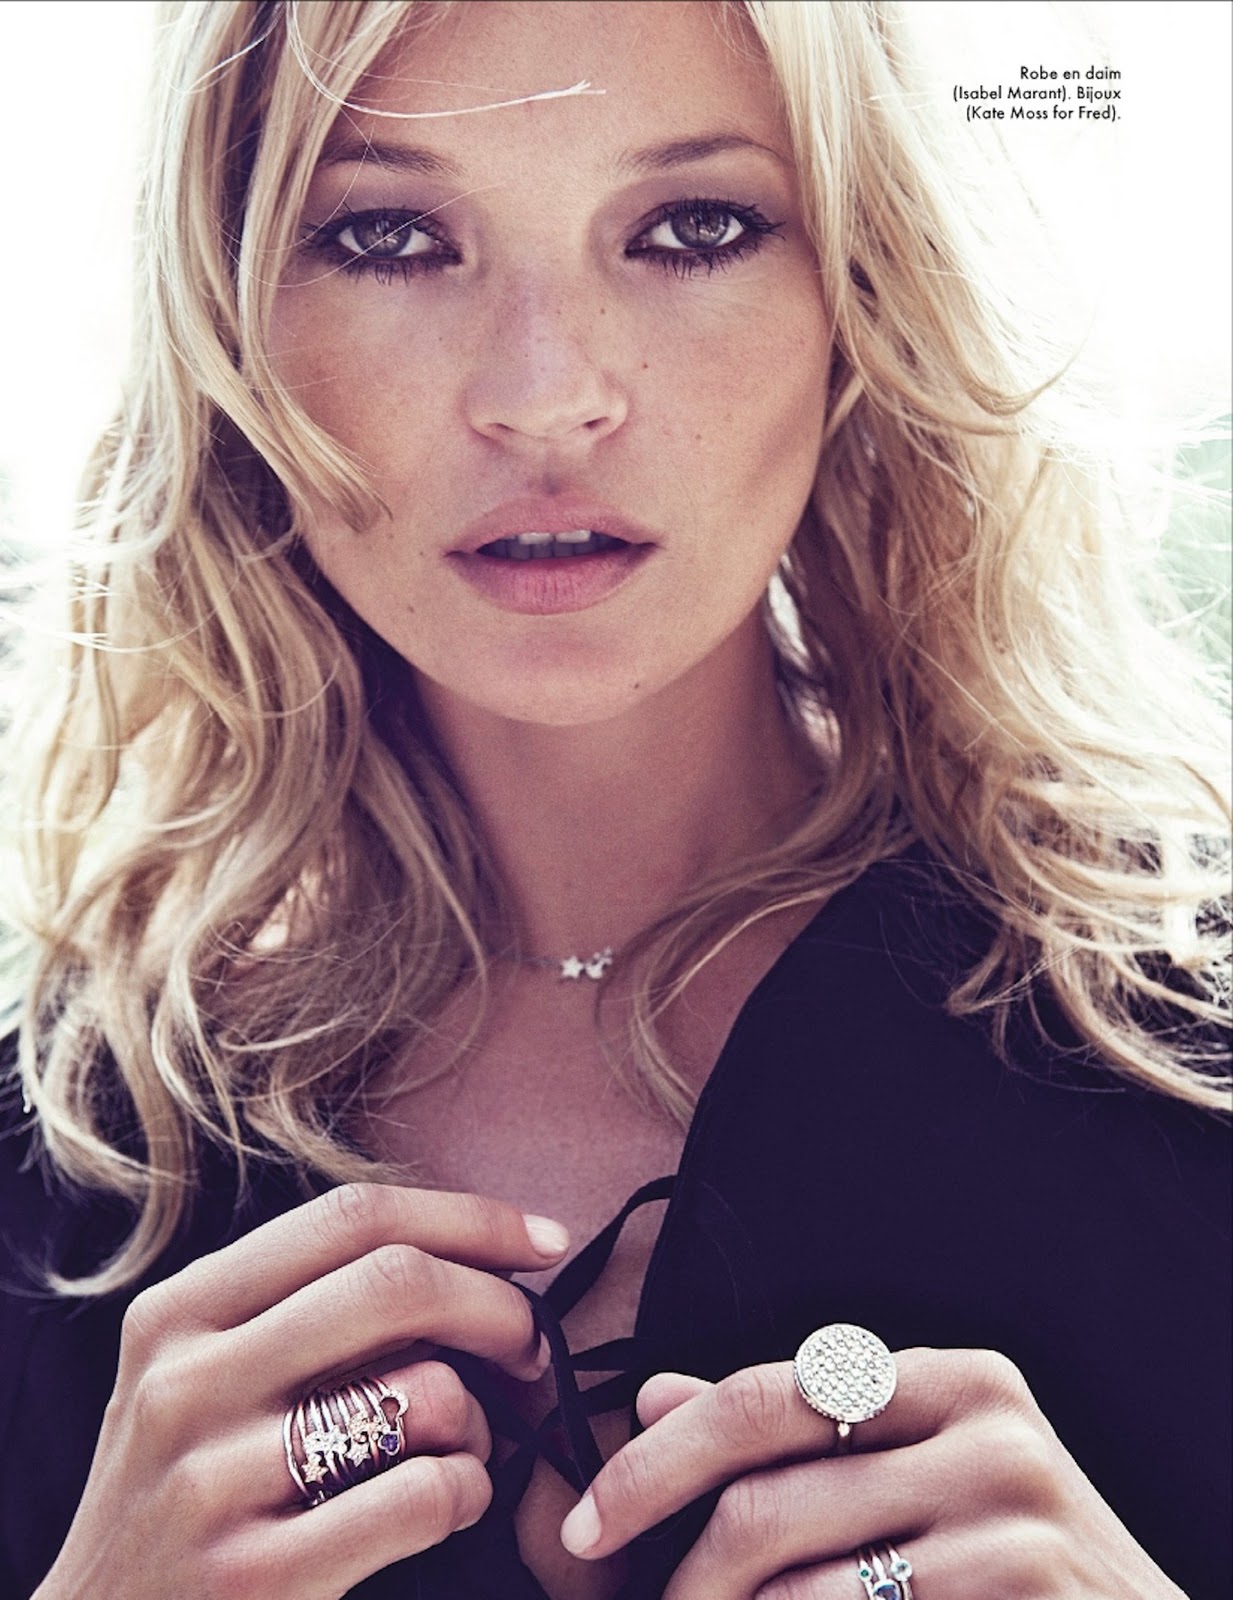 kate moss by sonia sieff for elle france no.3430 29th september 2011 ...